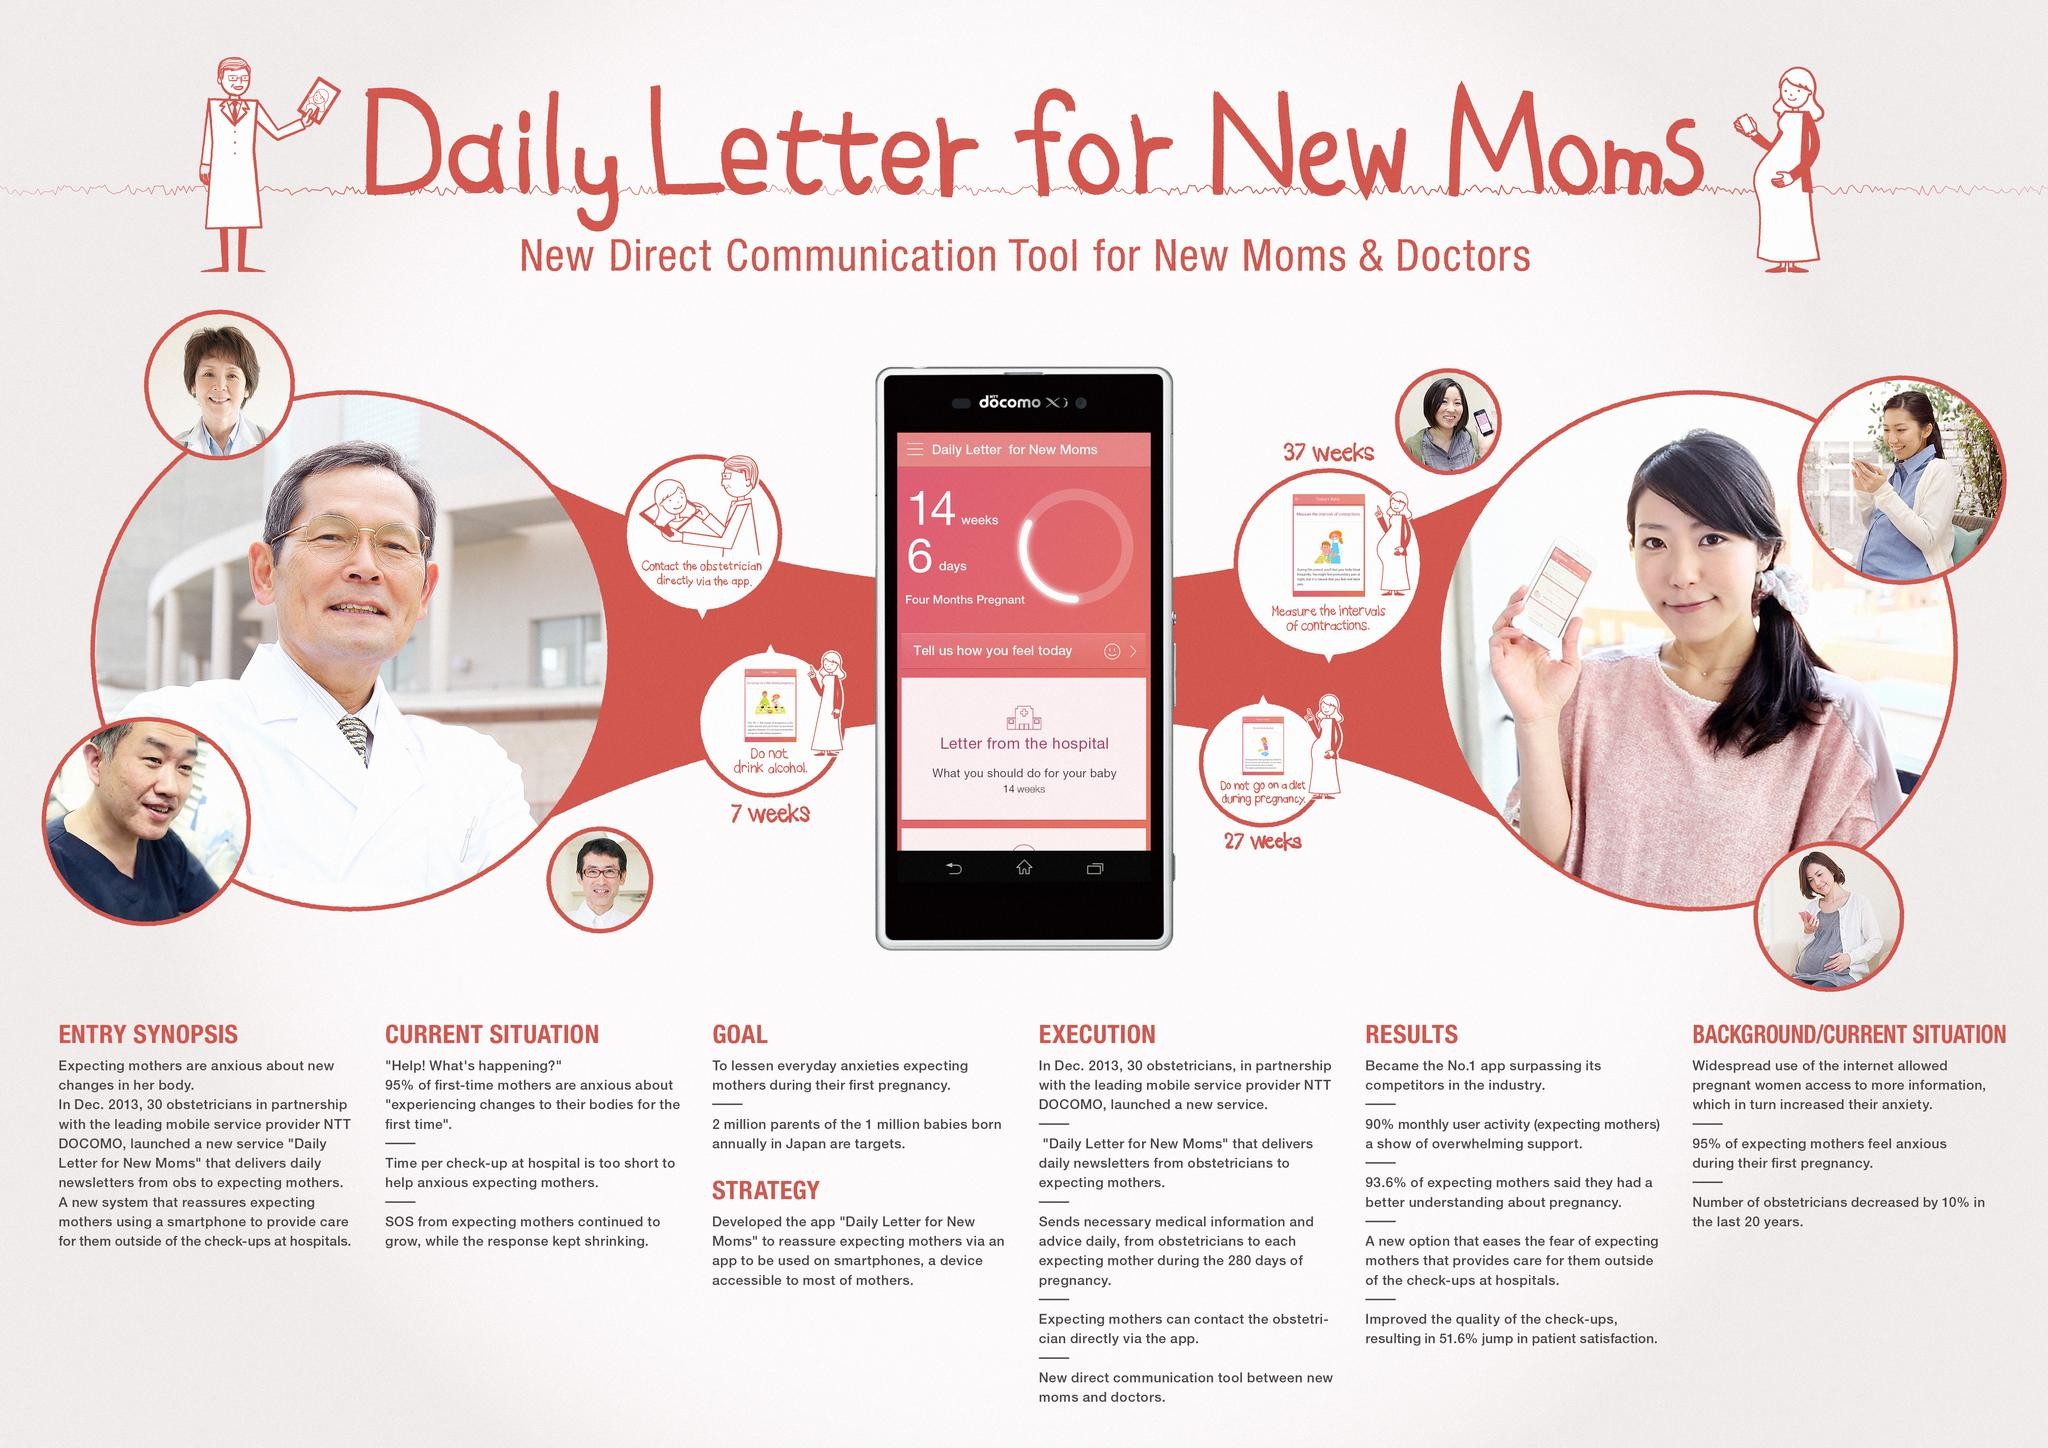 DAILY LETTER FOR NEW MOMS